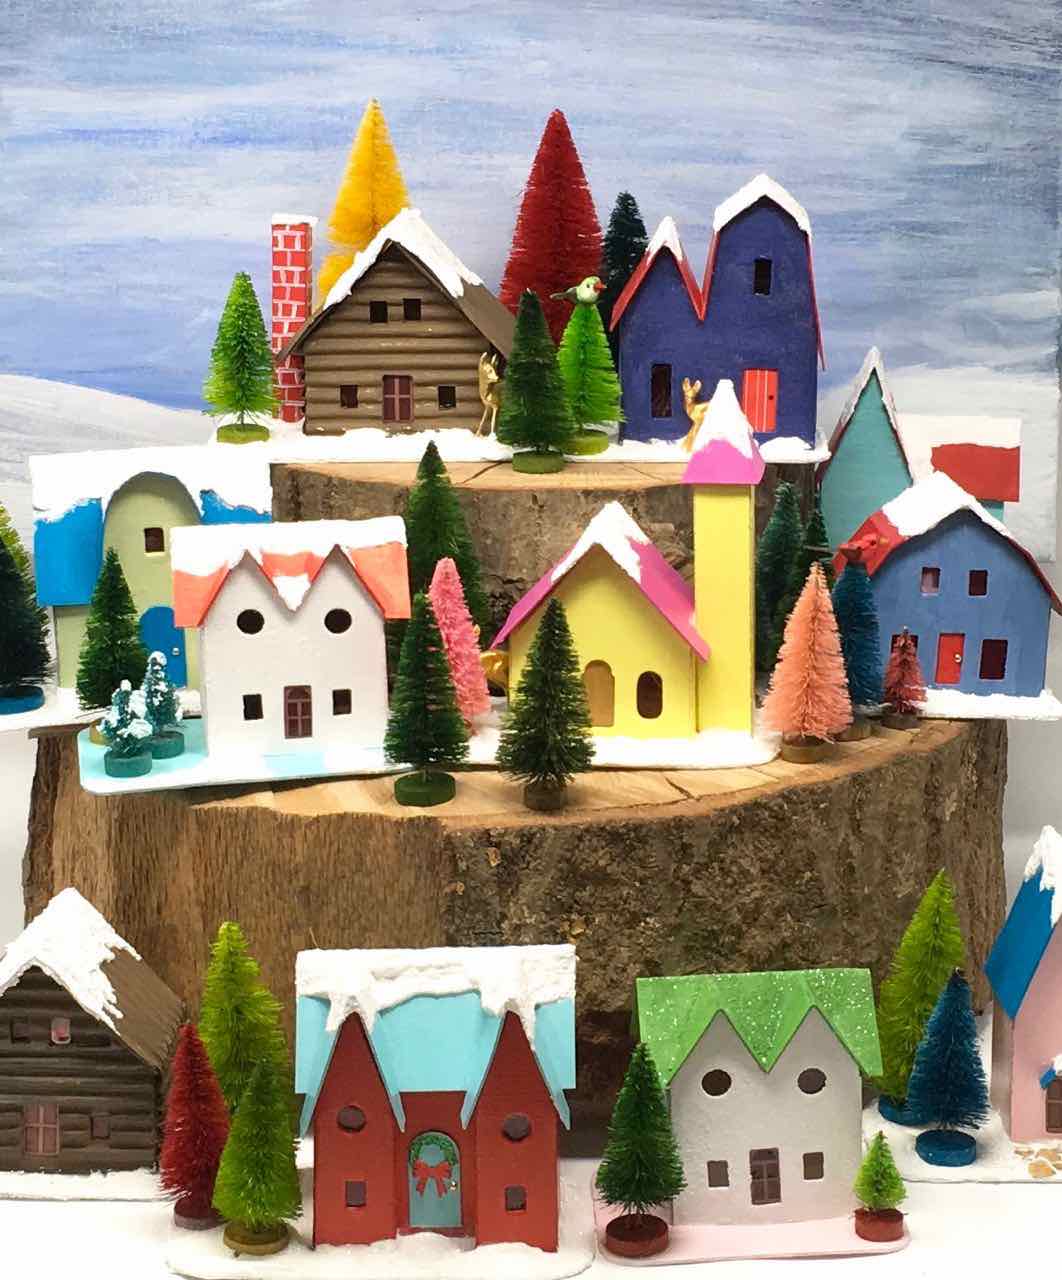 Download Where To Find Free Christmas Village Svgs